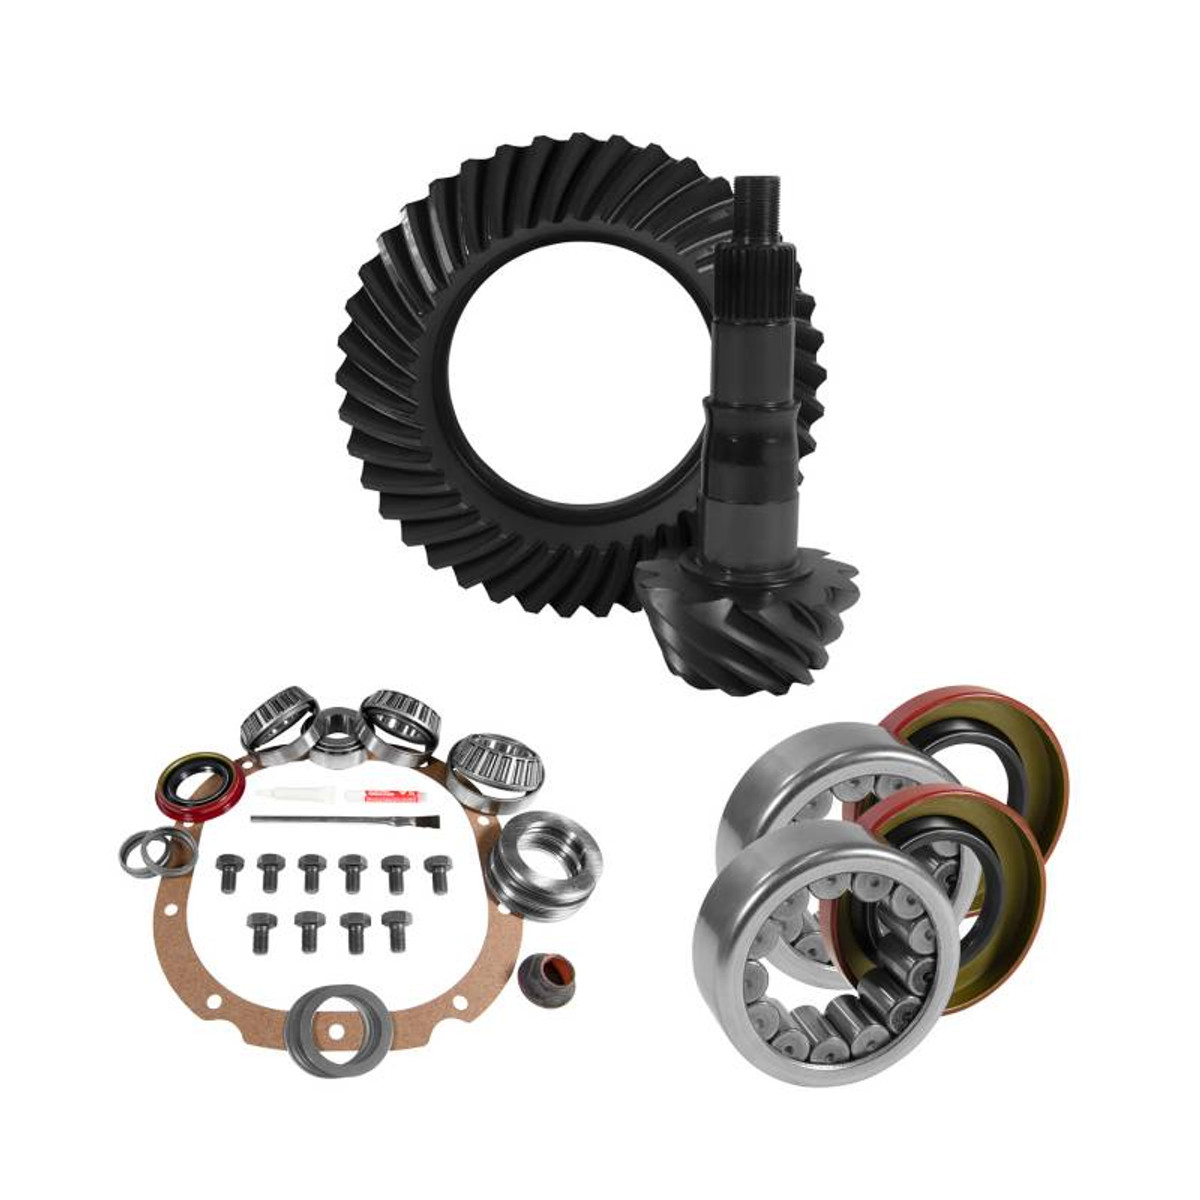 8.8 inch Ford 4.56 Rear Ring and Pinion Install Kit 2.99 inch OD Axle Bearings and Seals YGK2058